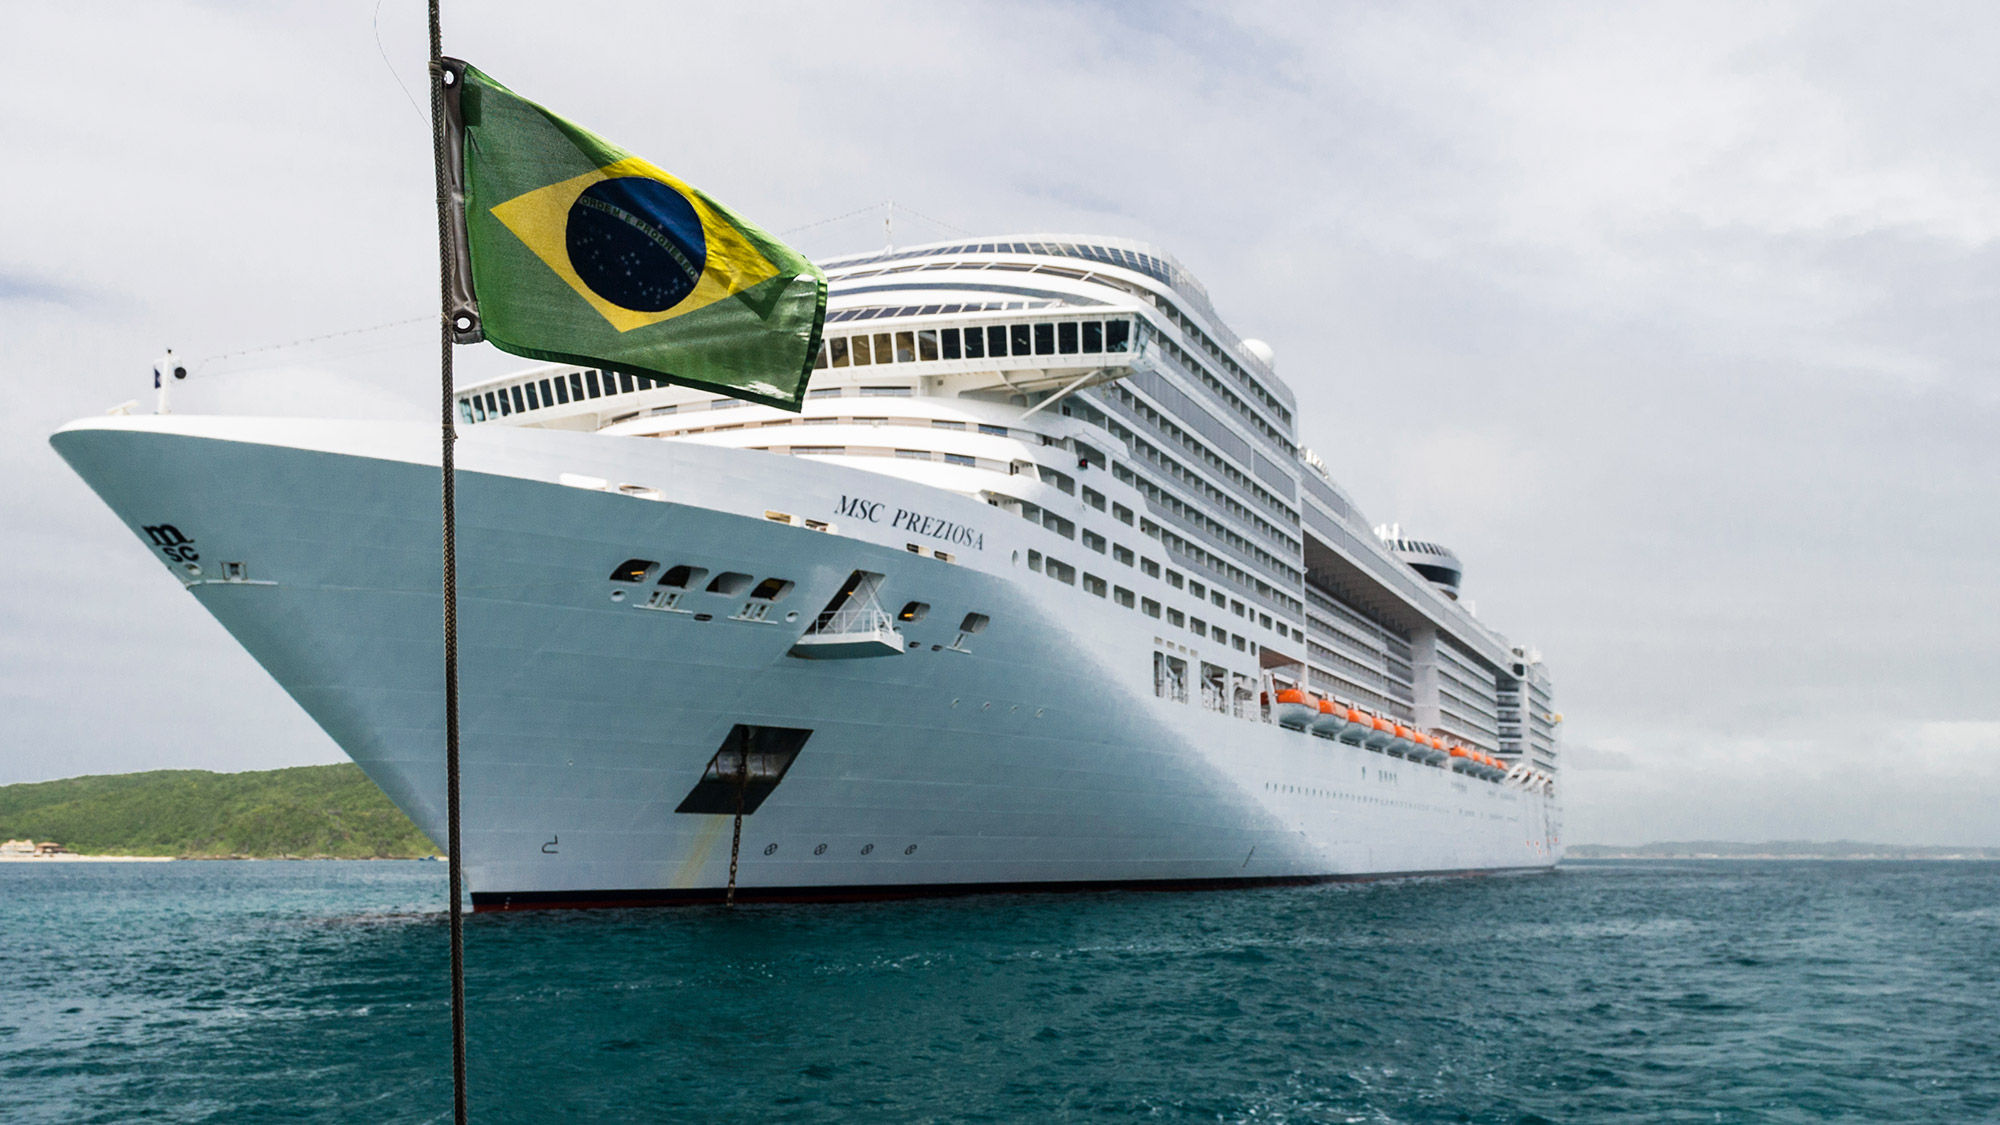 This summer's five cruise ships are currently anchored off the coast of Santos, ready for the resumption, with protocols fully implemented and more than 7,000 Brazilian and foreign crew members on board ready to work.